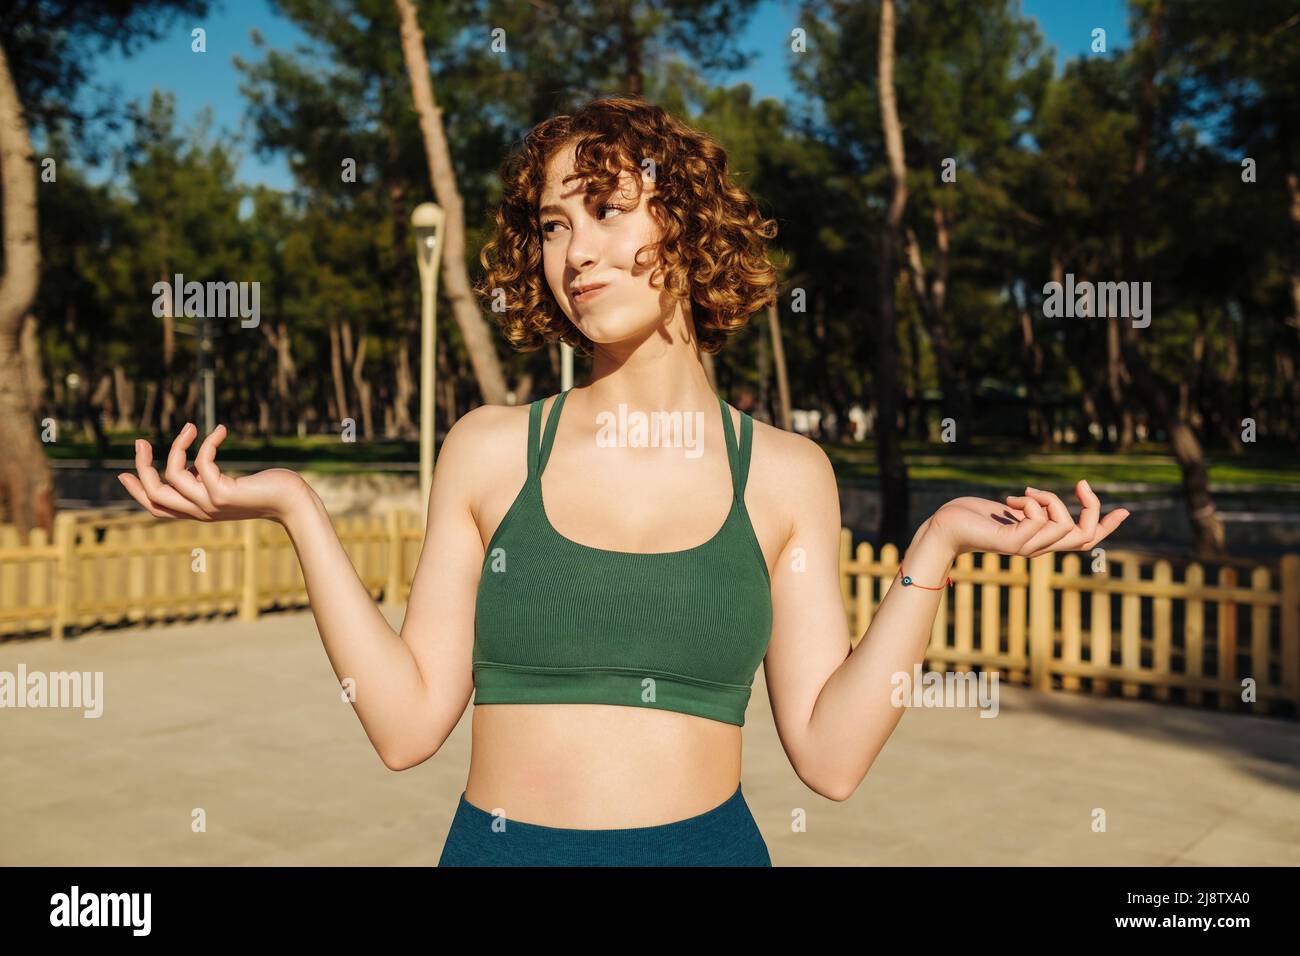 Photo portrait of clueless unsure female shrugging shoulders wearing green sports bra on city park, outdoors. Stock Photo